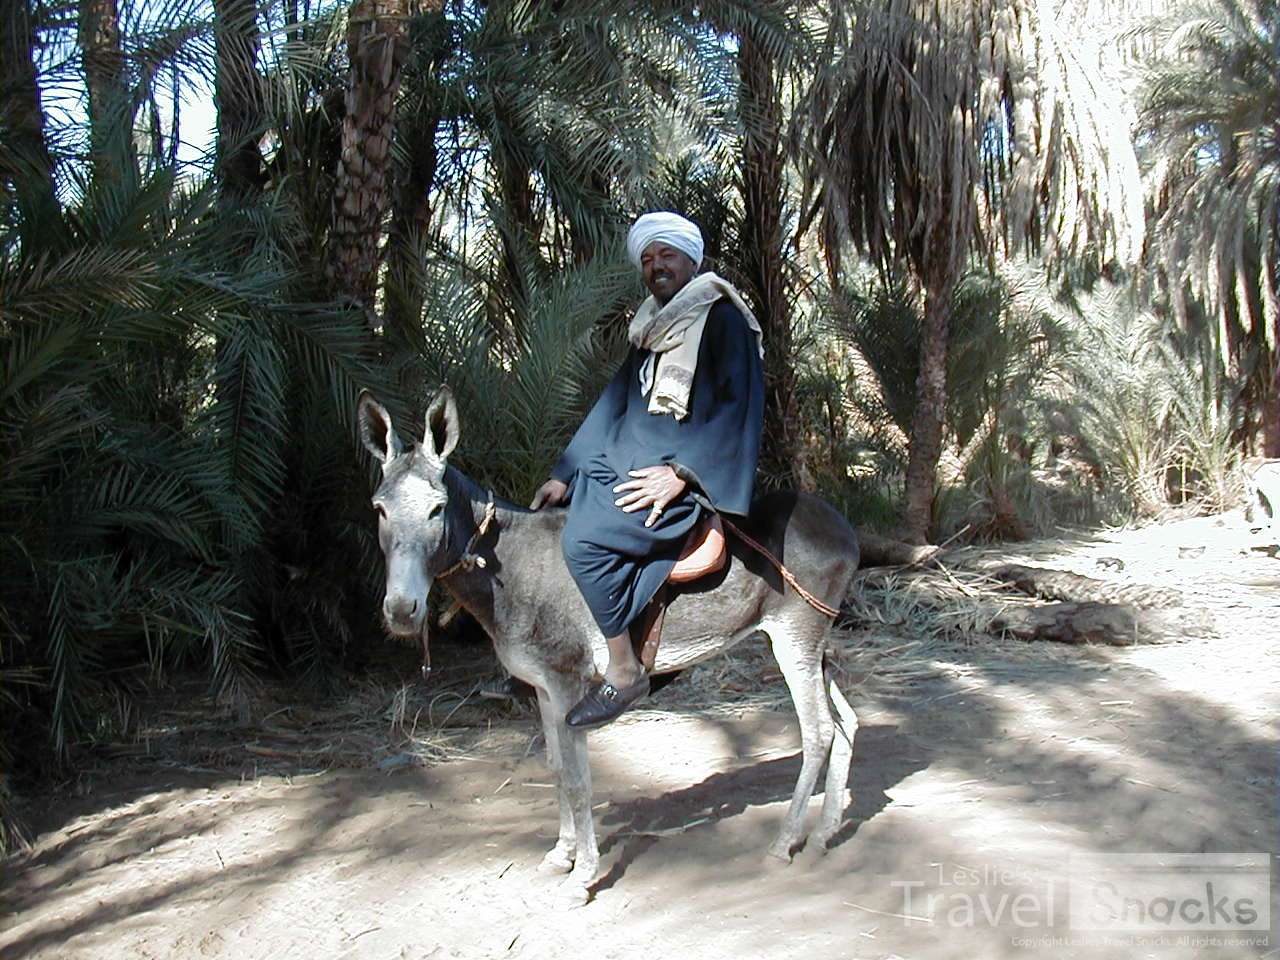 At one of our felucca stops, i wandered around and met  this guy. He let me try to ride his donkey, gave me a bowl of fresh dates, and asked me to marry him. LOL